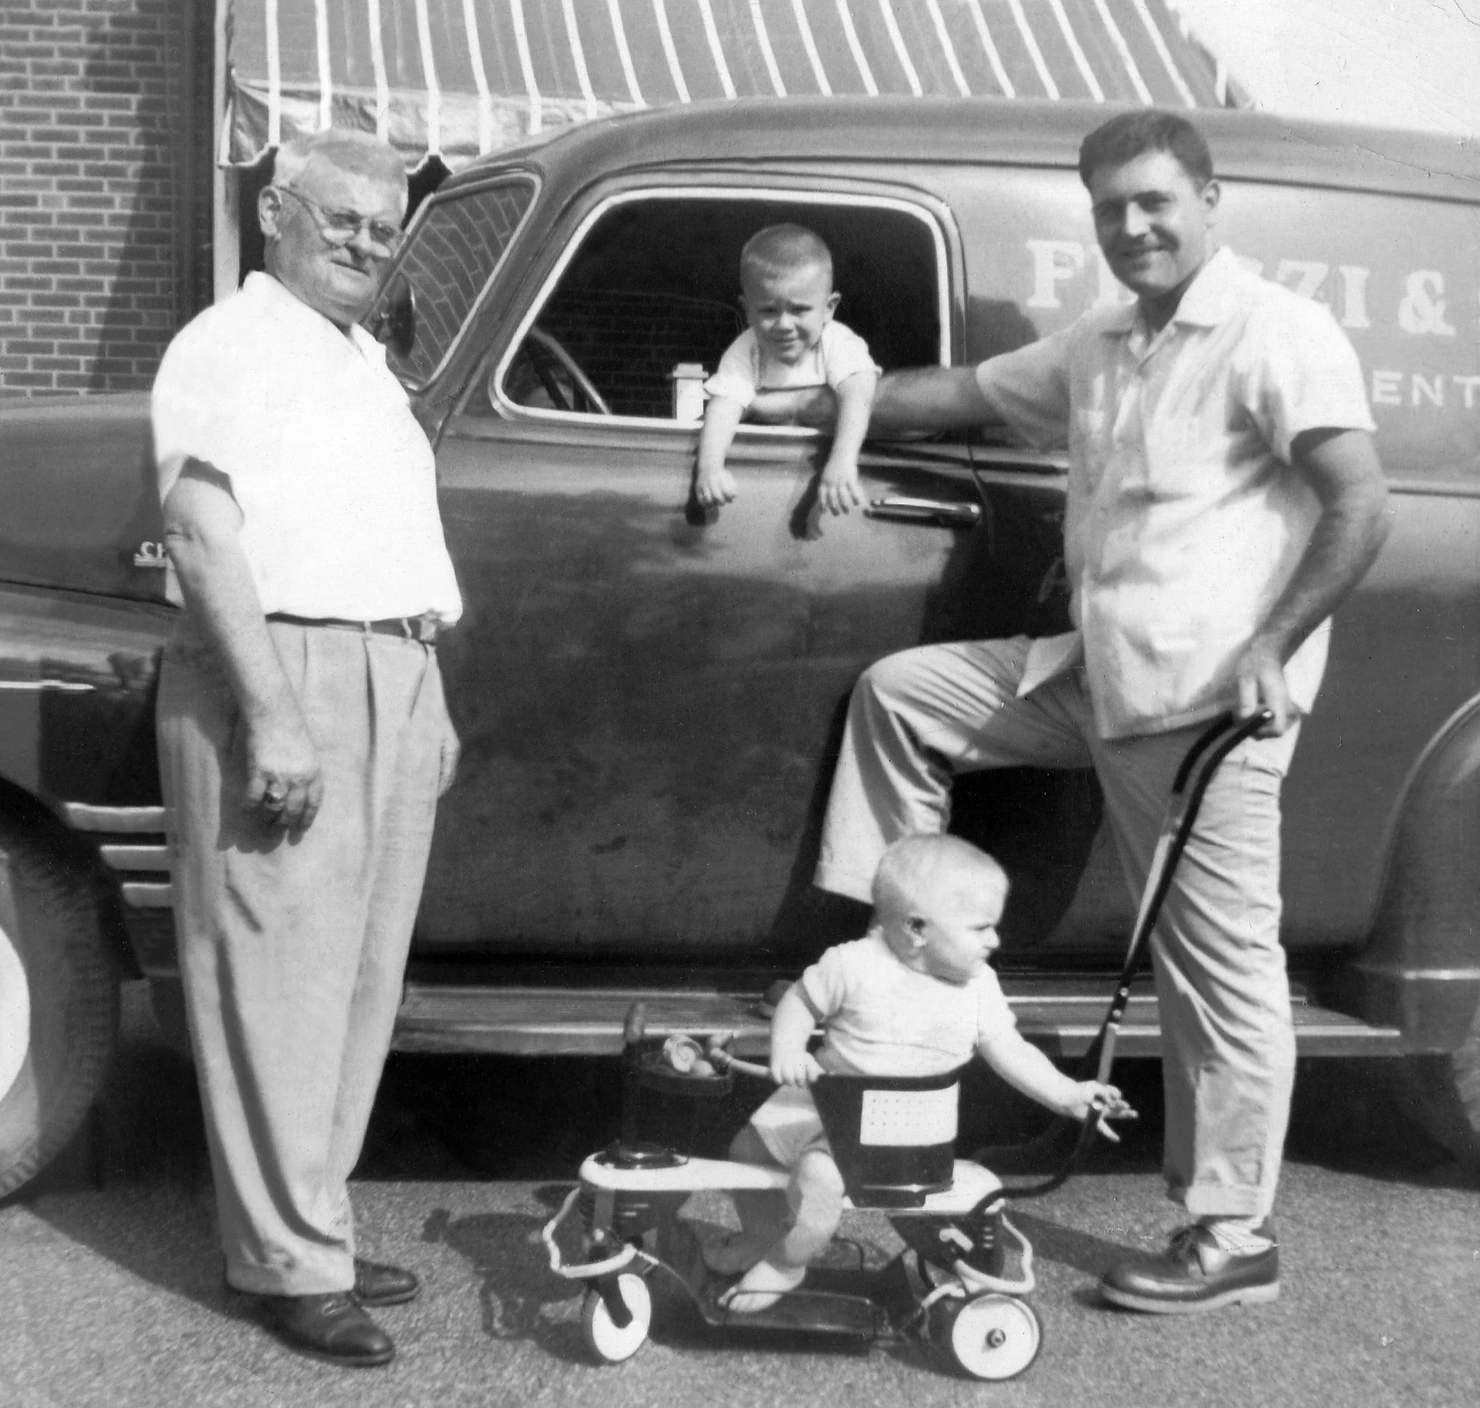 Photo courtesy Dan Frizzi, Jr. Pictured is the Frizzi & Son delivery truck with the author’s grandfather Abe (left) , his dad, him in the truck and his brother, Dick in the stroller, about 1954.